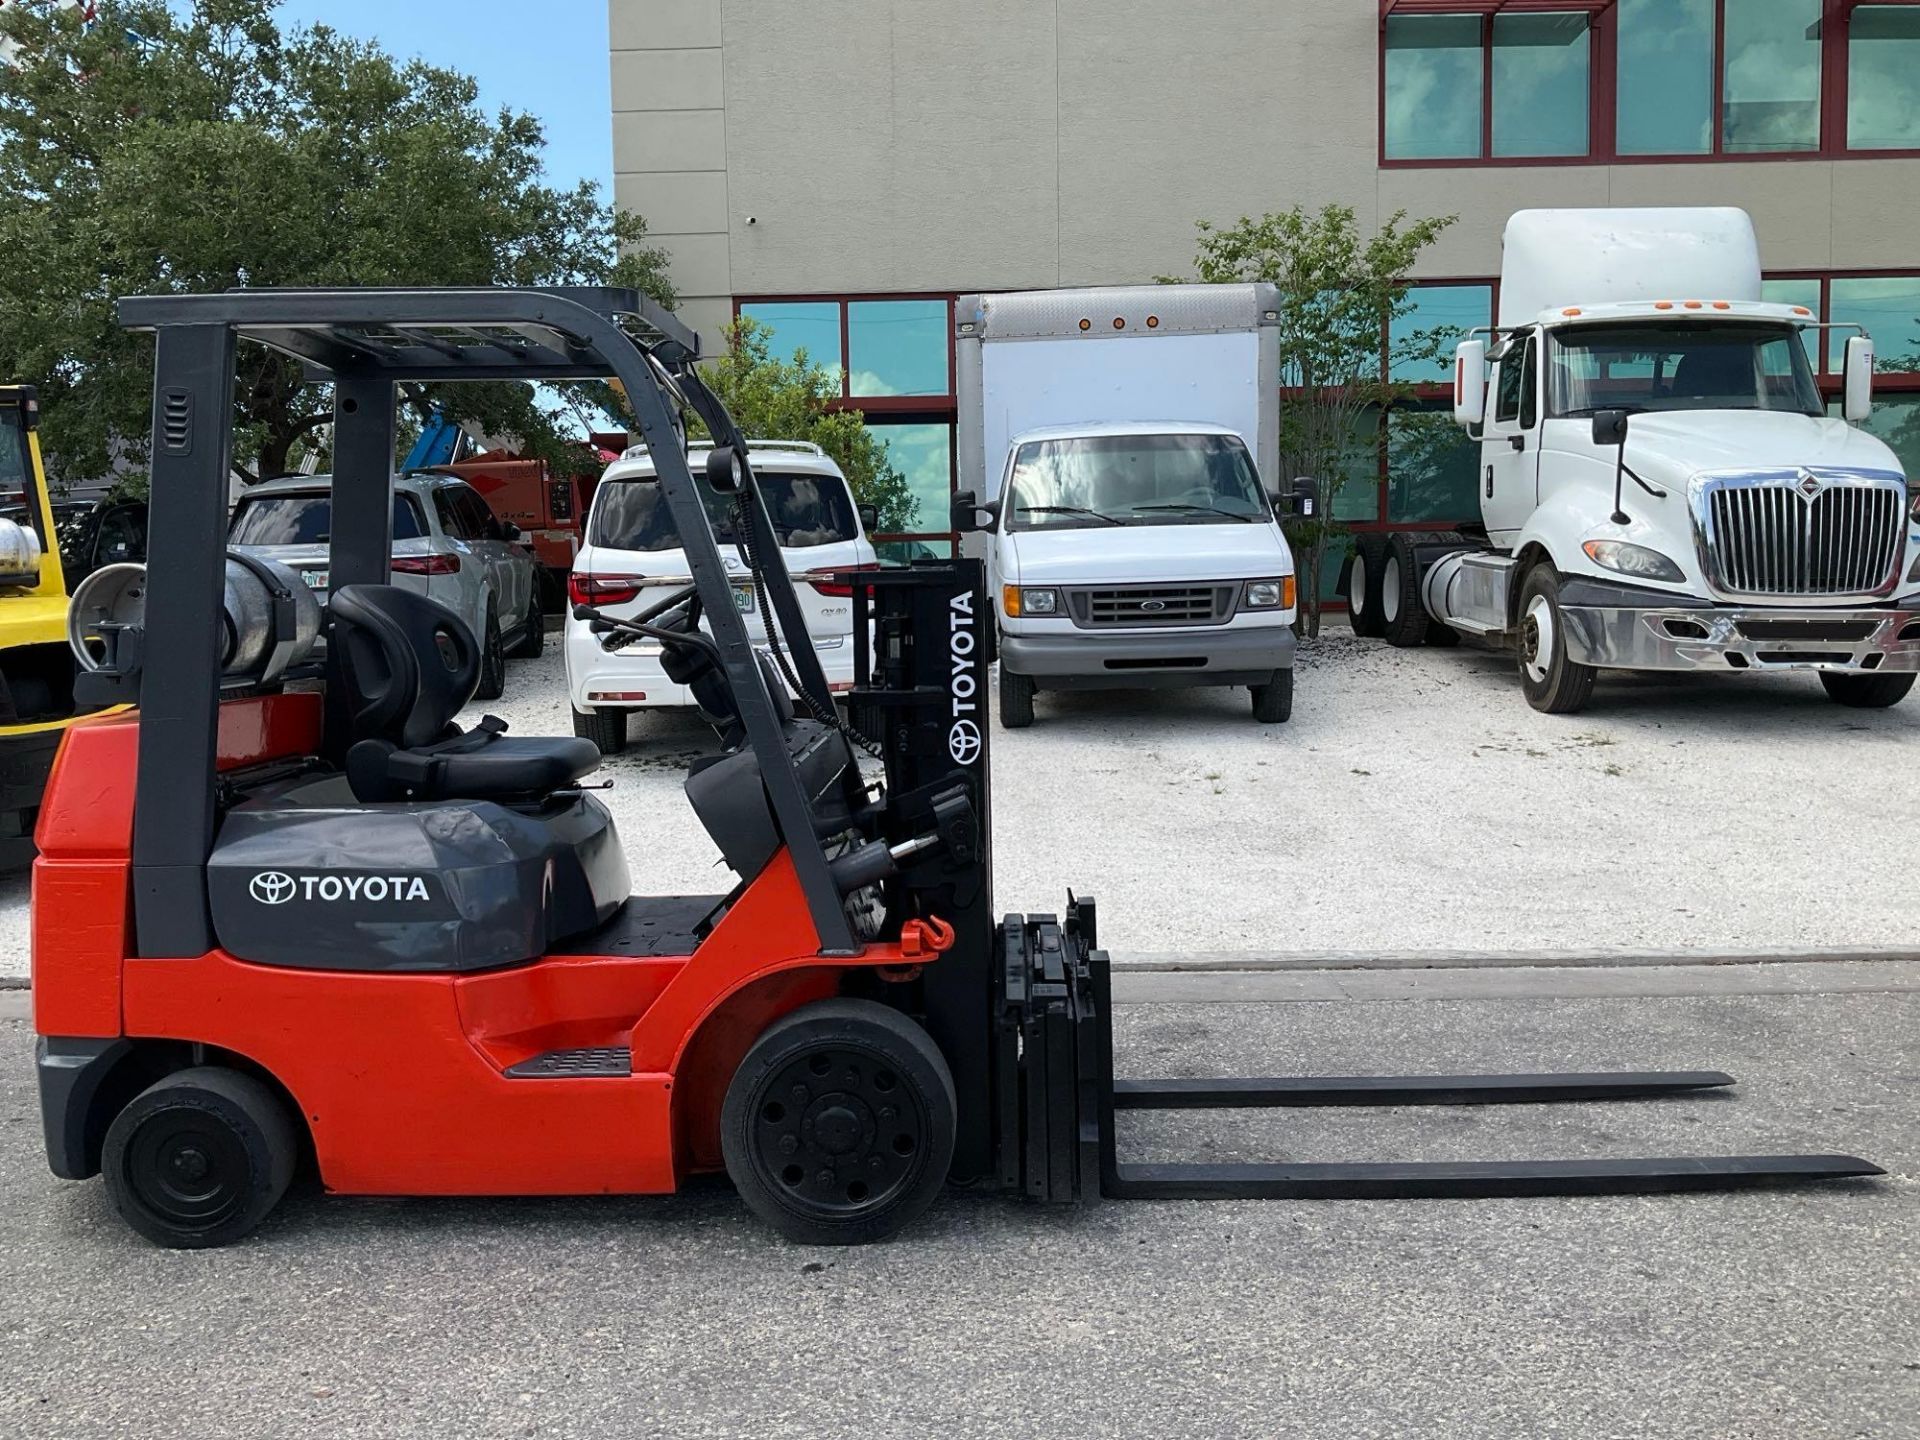 TOYOTA FORKLIFT MODEL 7FGCU25, LP POWERED, APPROX MAX CAPACITY 4700, MAX HEIGHT 80in, TILT, SIDE - Image 6 of 14